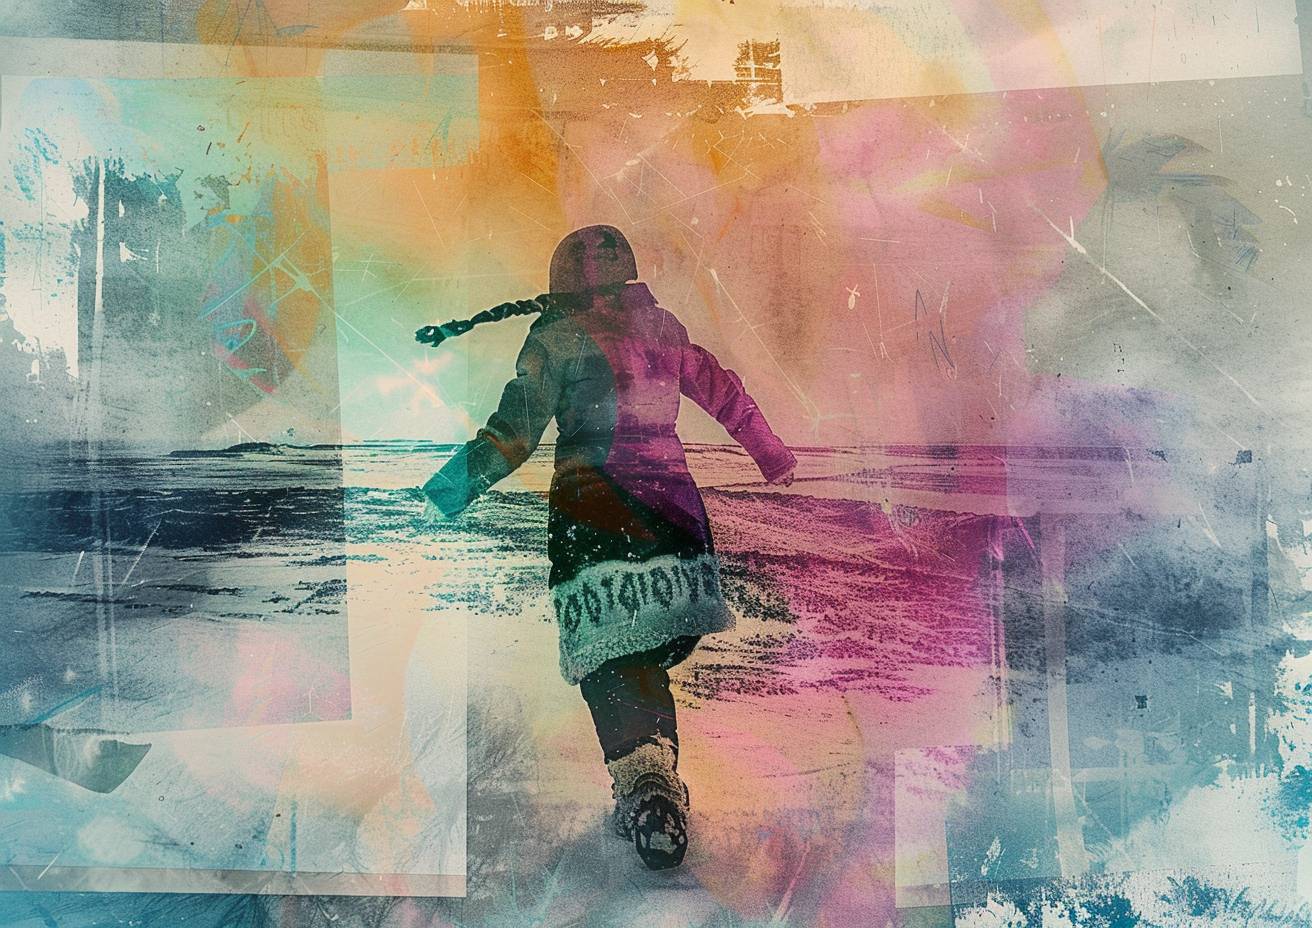 Abstract layered silkscreen print, an Inuit woman dances on the tundra under ethereal aurora nights, fragmented and distorted rectangles, large letters stencil overlay, low contrast palette, rough texture, flat image